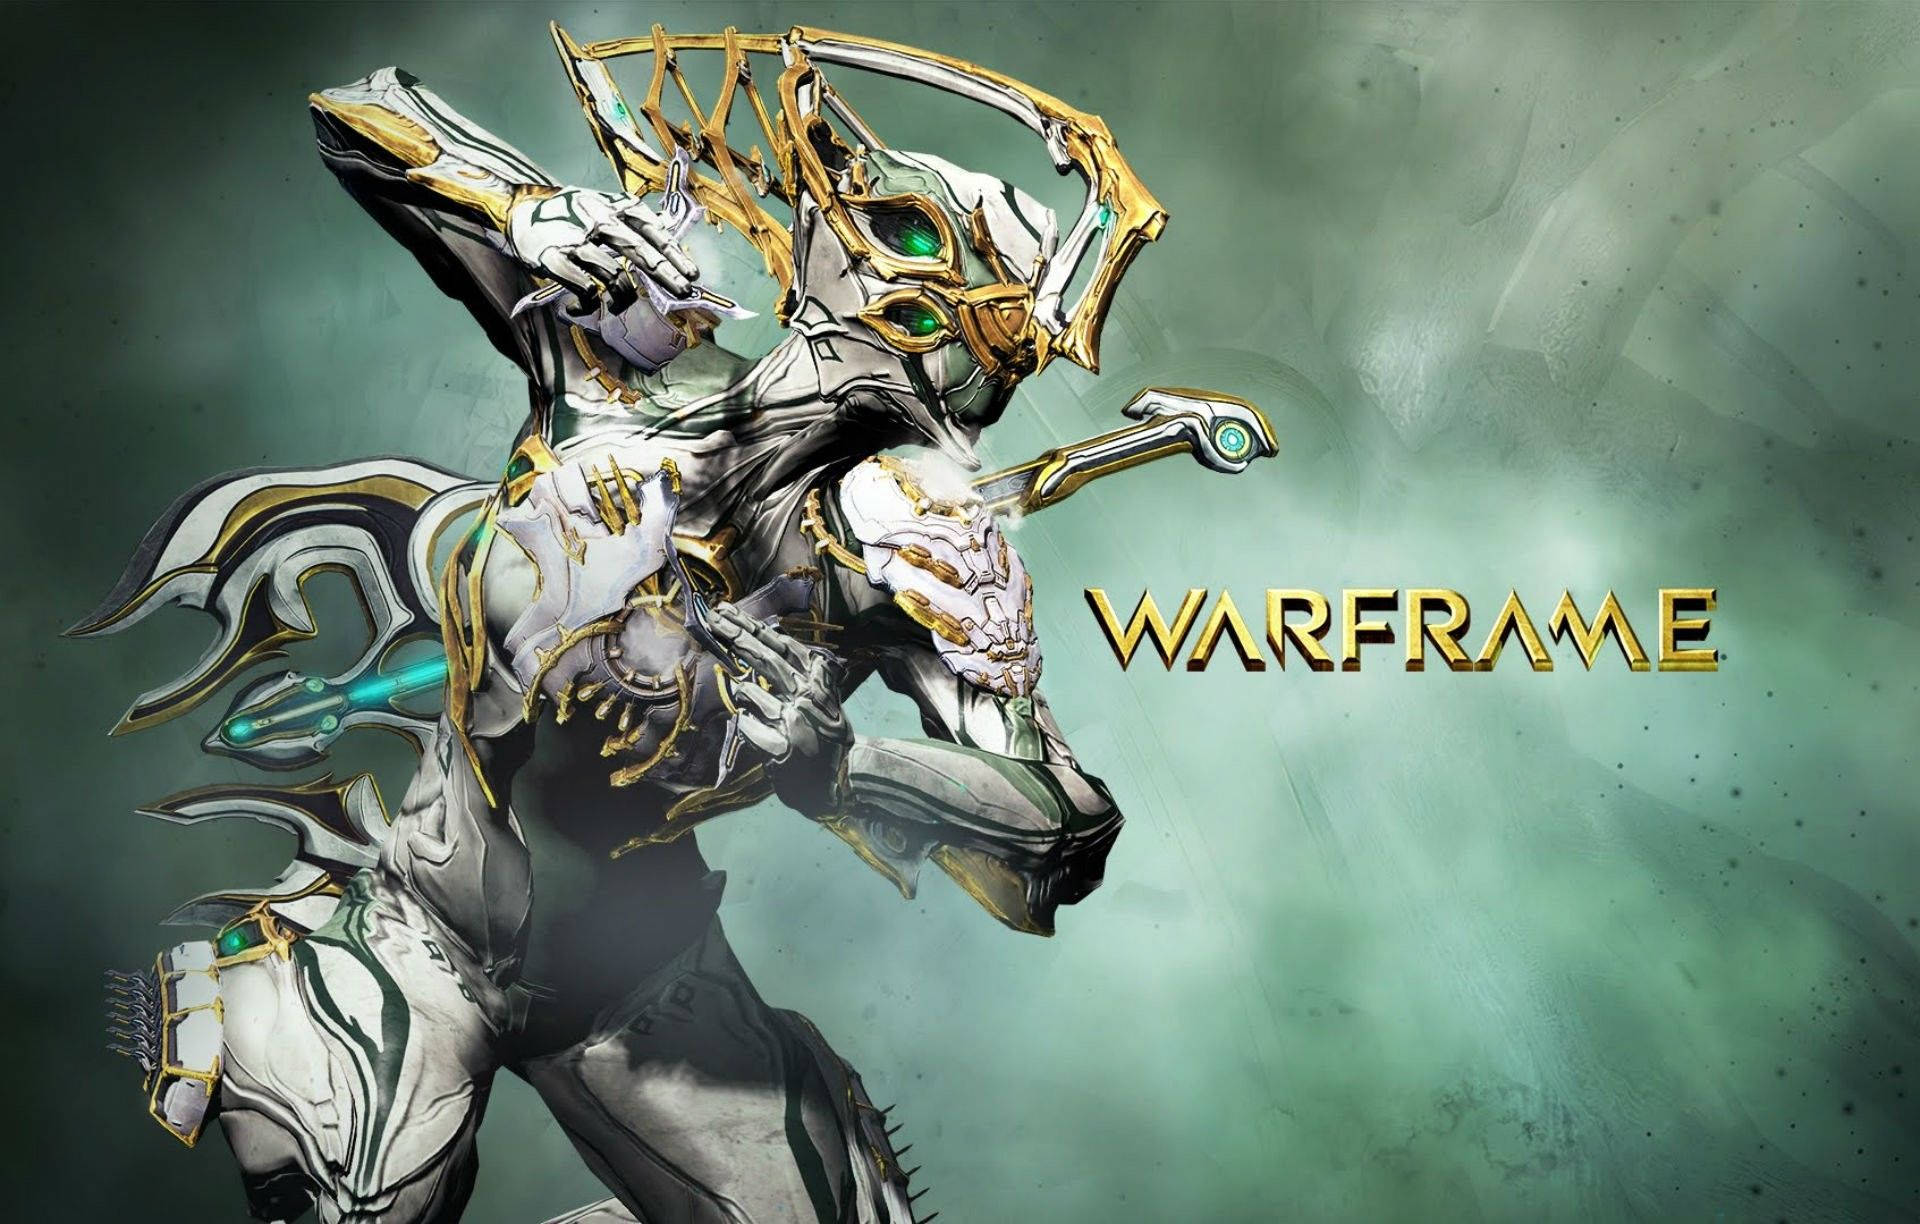 “Warframe’s Soldier Volt charges into battle!” Wallpaper